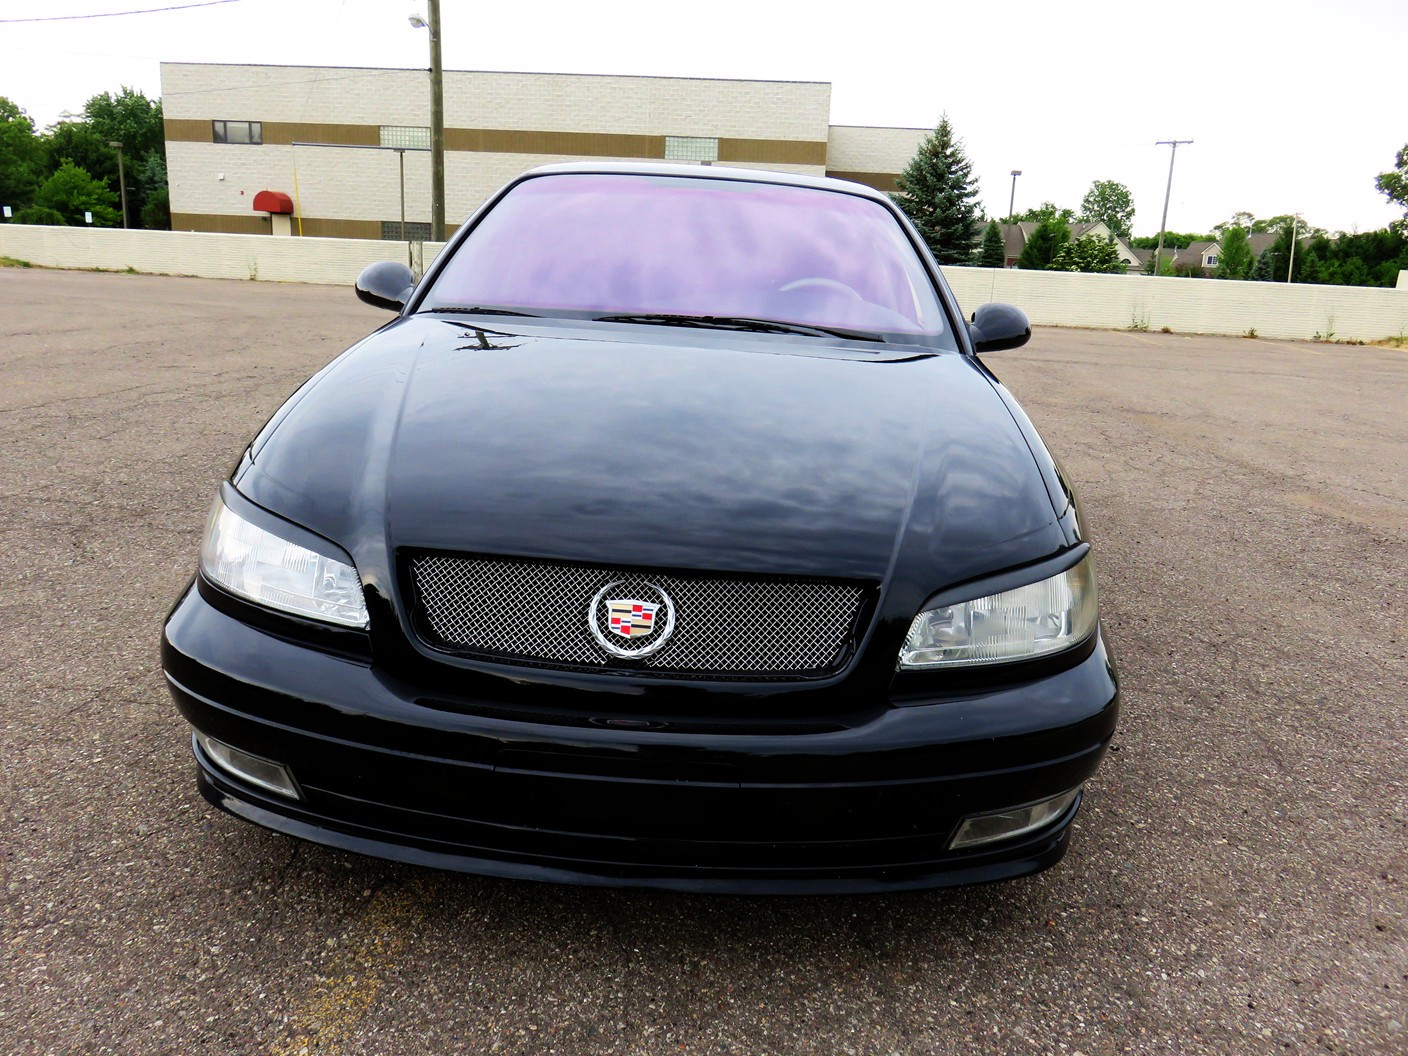 Money No Object: 2001 Cadillac Catera With An LS7 And A Six-Speed